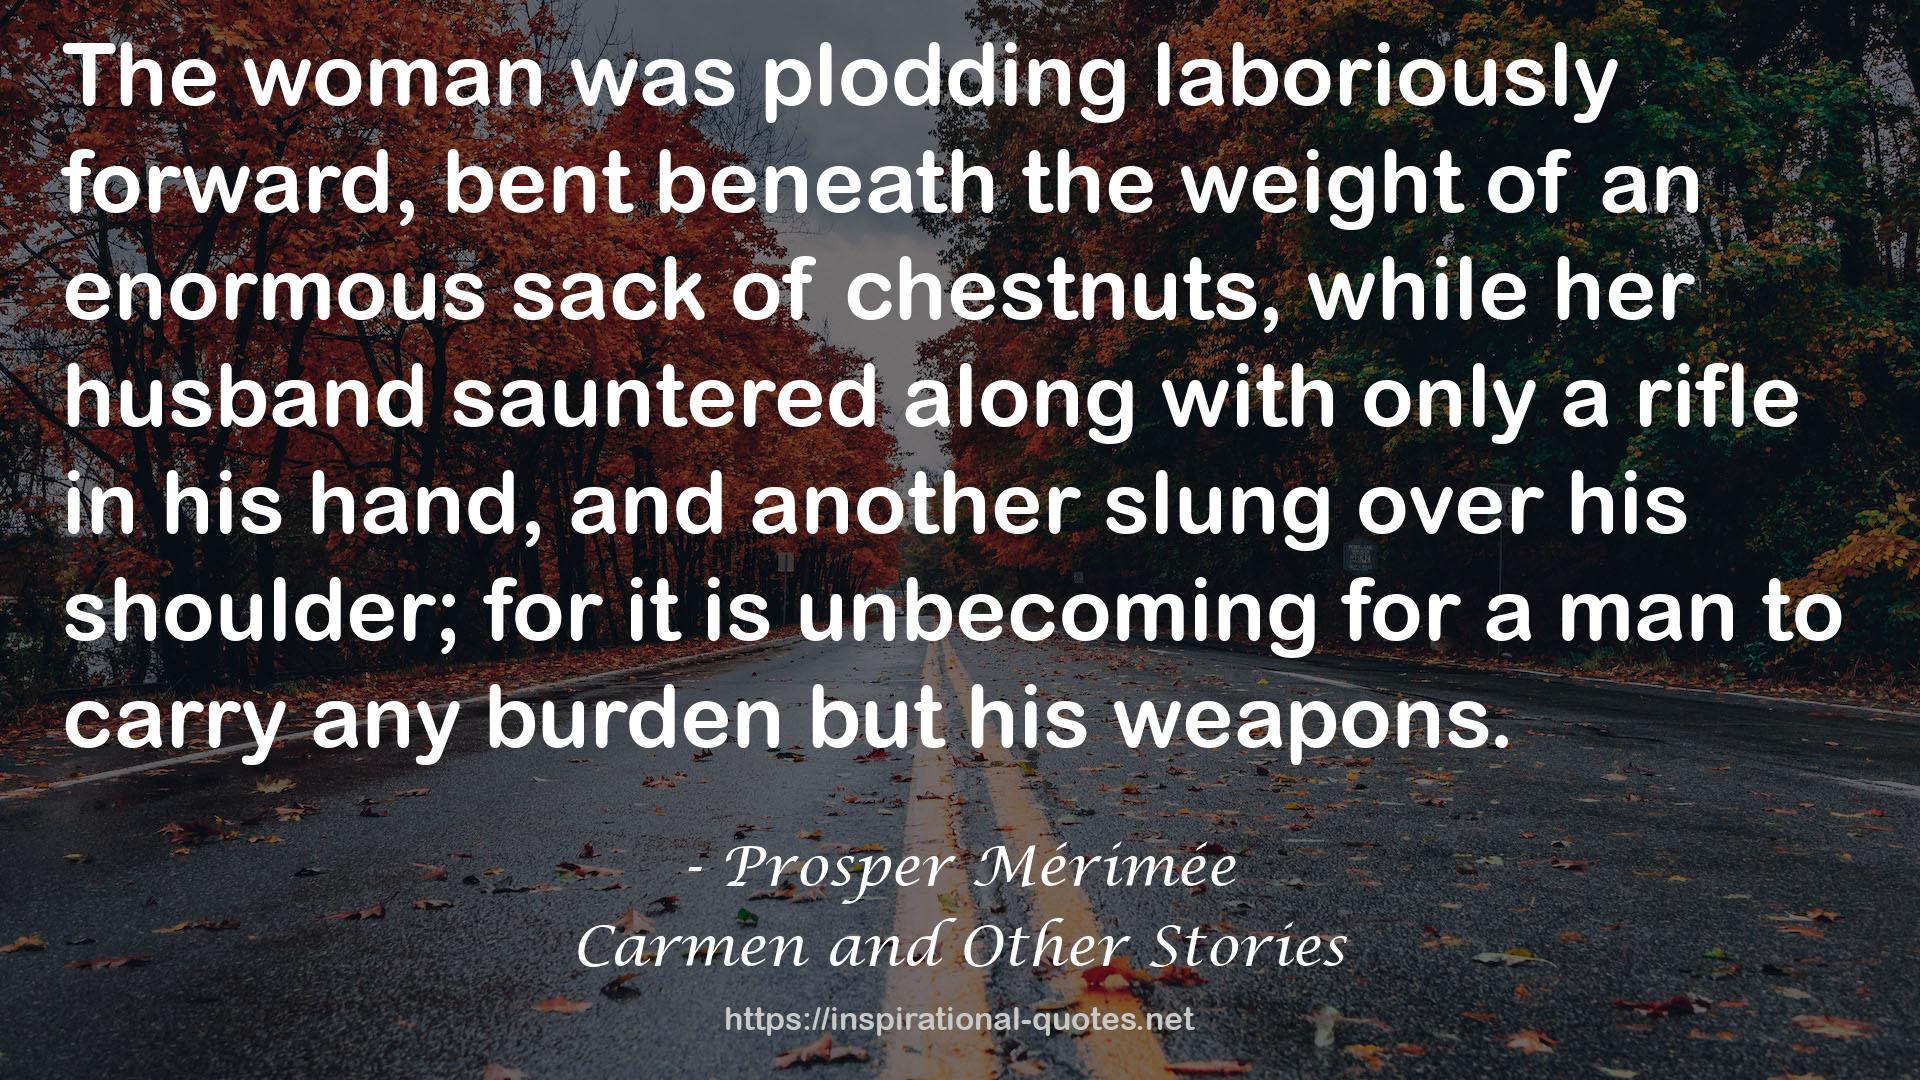 Carmen and Other Stories QUOTES